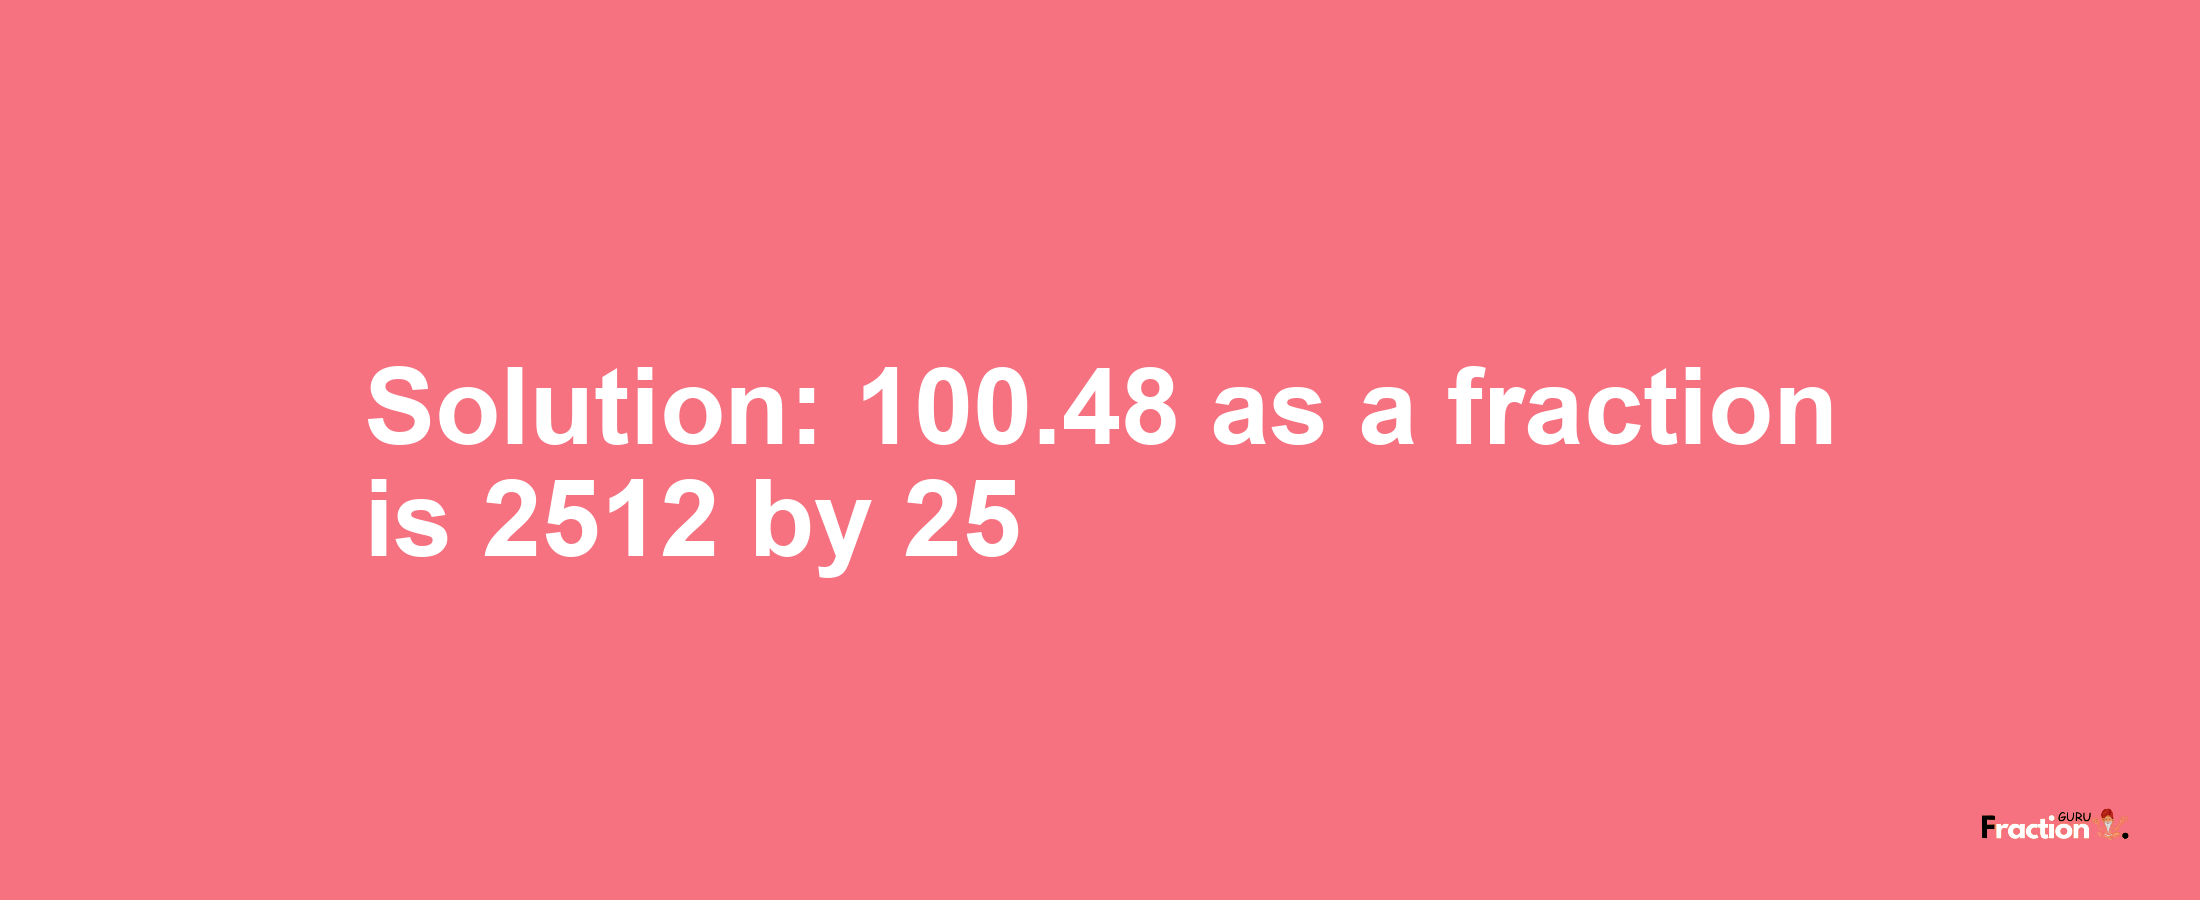 Solution:100.48 as a fraction is 2512/25